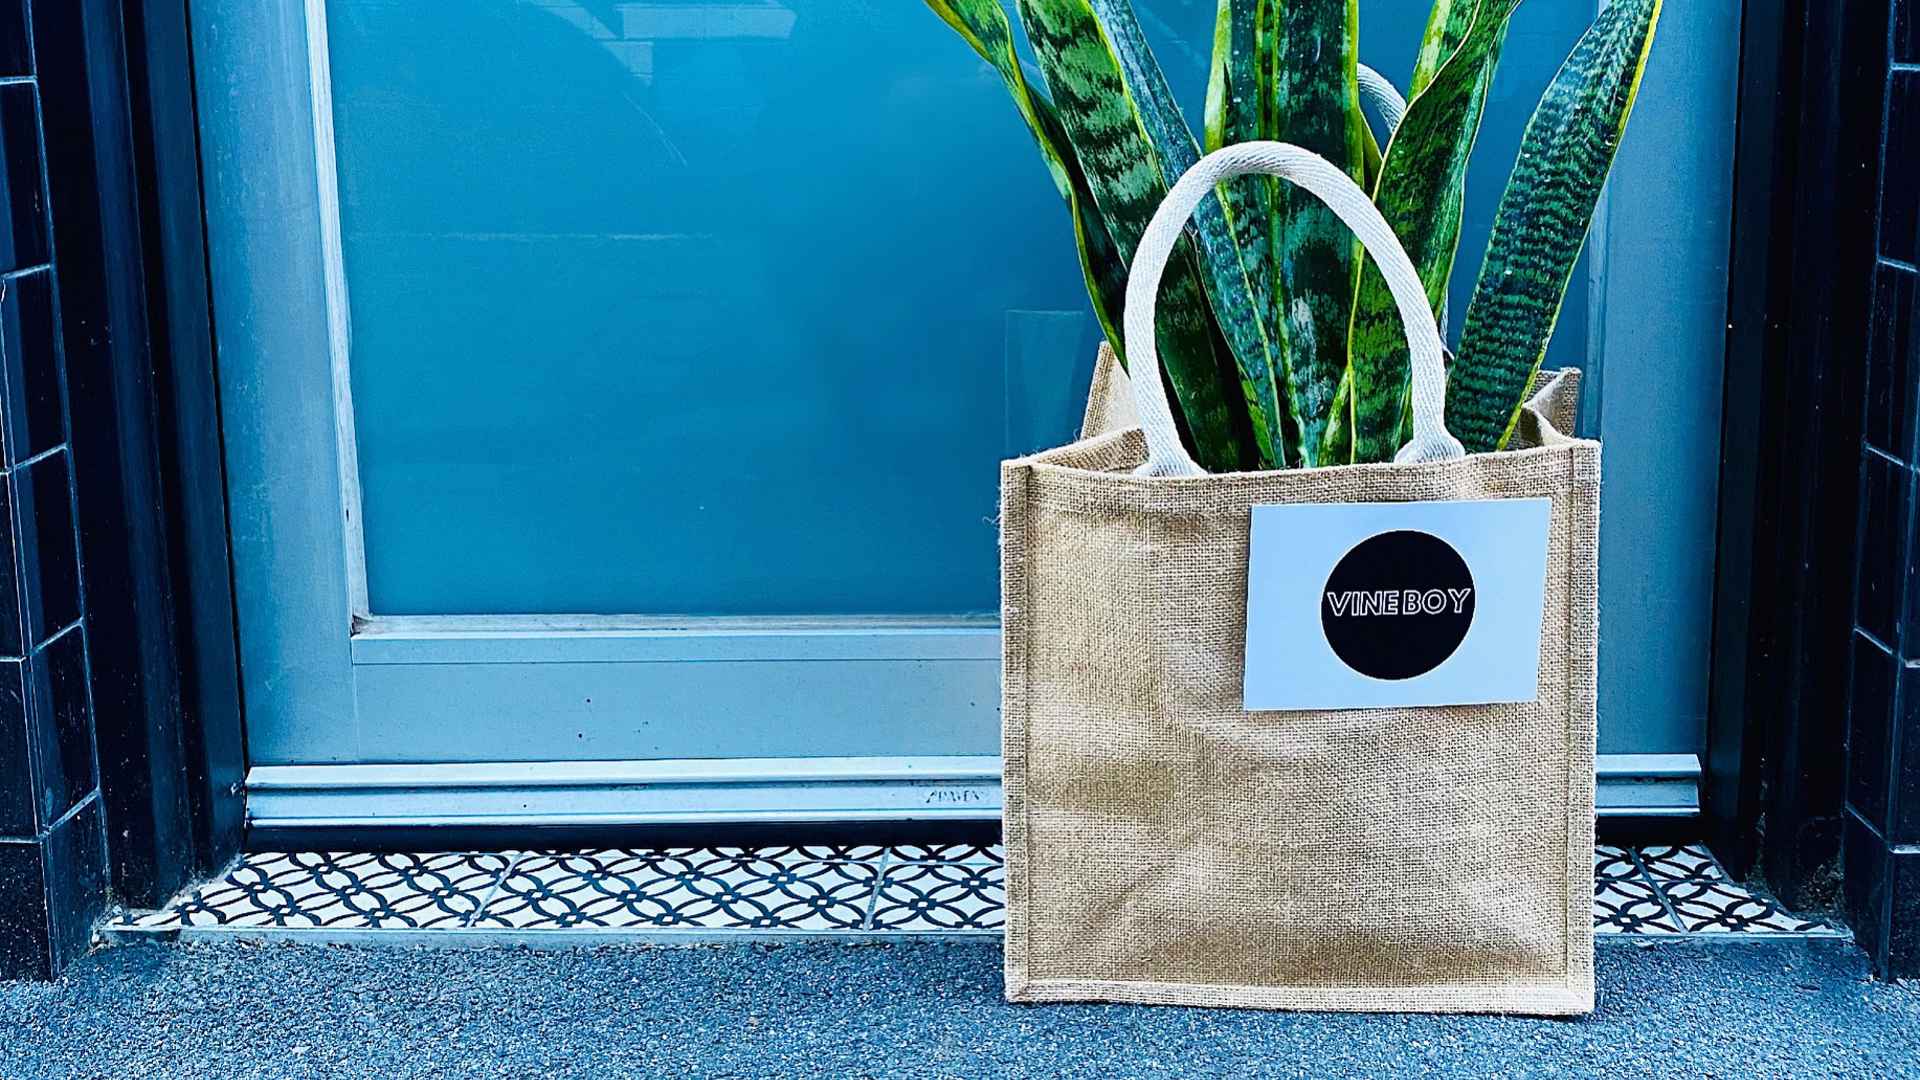 Vine Boy Is Melbourne's New Online Shop for Affordable Plants and Gifts